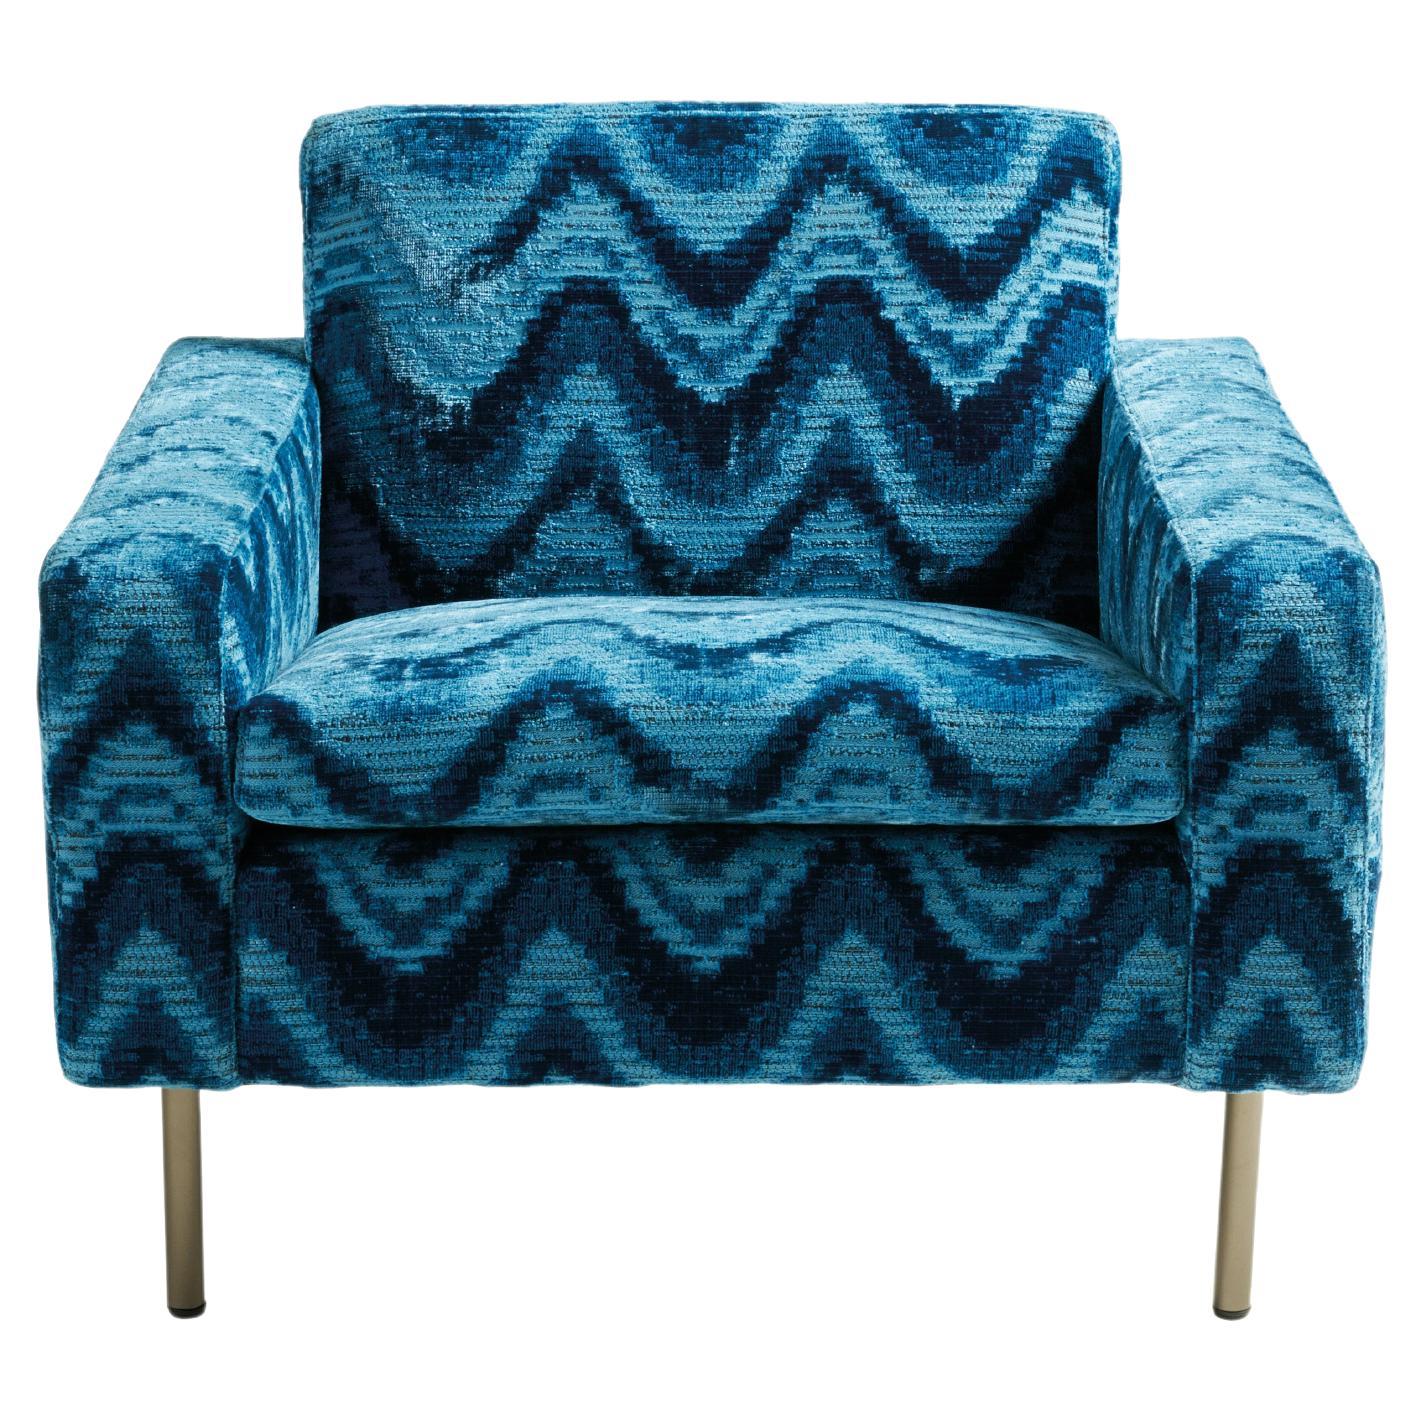 21st Century Type Armchair in Blue Jacquard Fabric by Etro Home Interiors For Sale